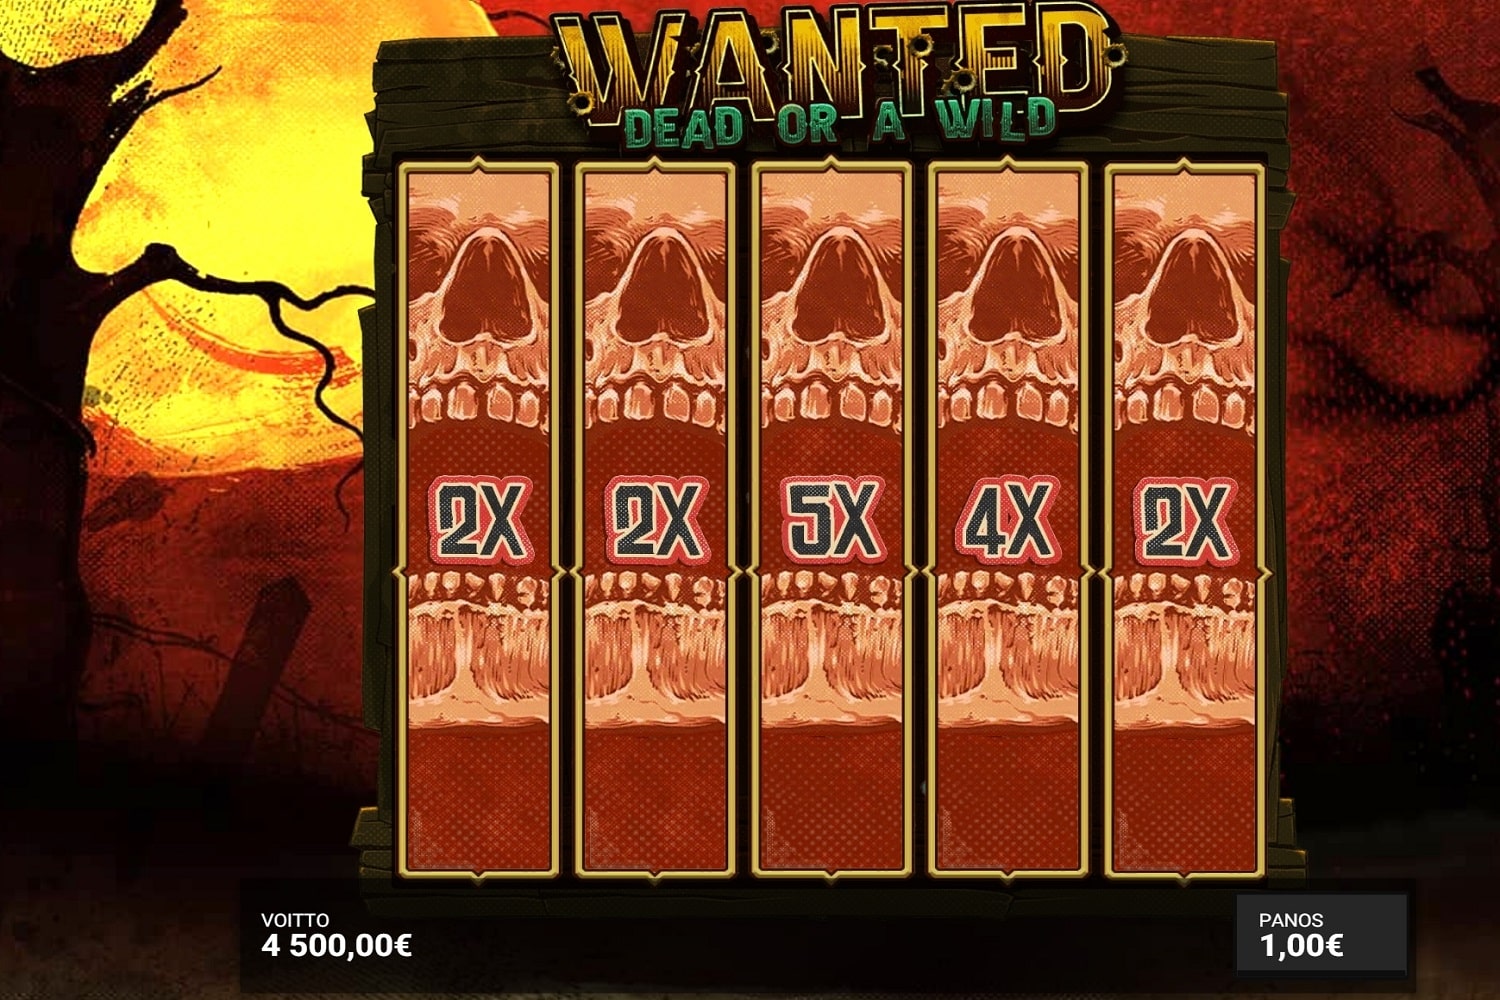 Wanted Dead Or a Wild Casino win picture by Rateksoni 4500€ 4500x 18.8.2023